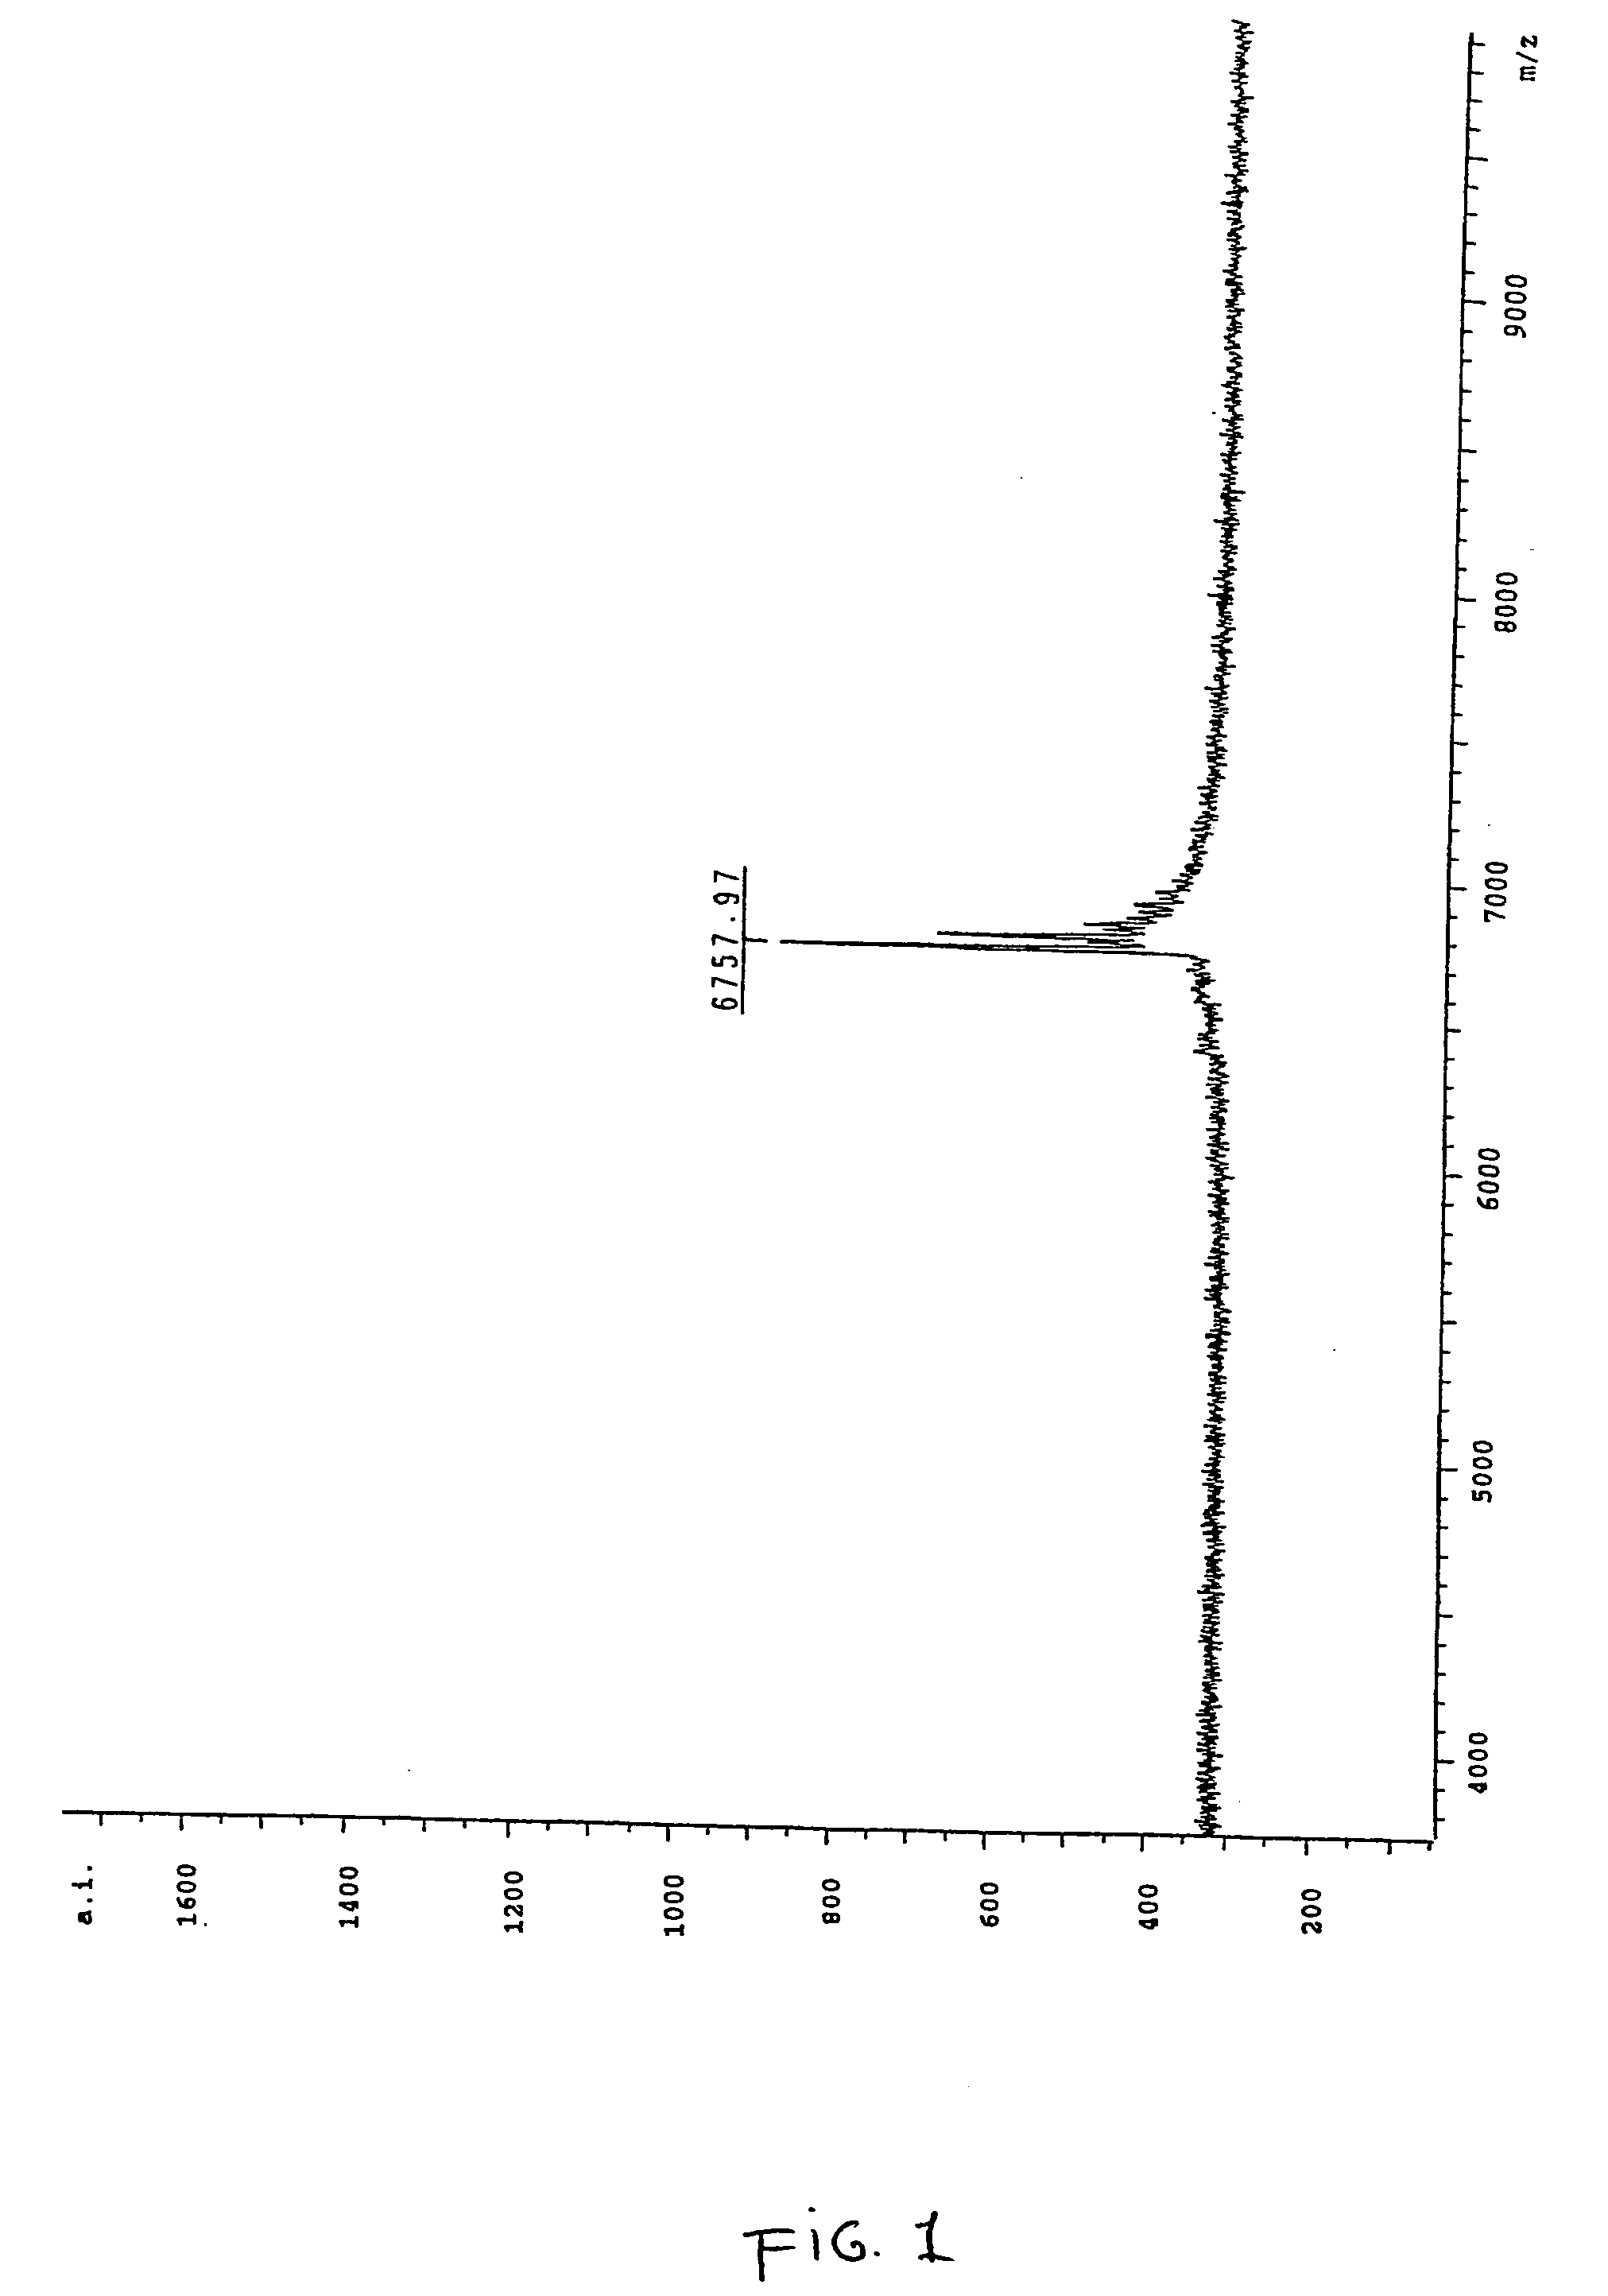 Method for the analysis of methylation patterns within nucleic acids by means of mass spectrometry